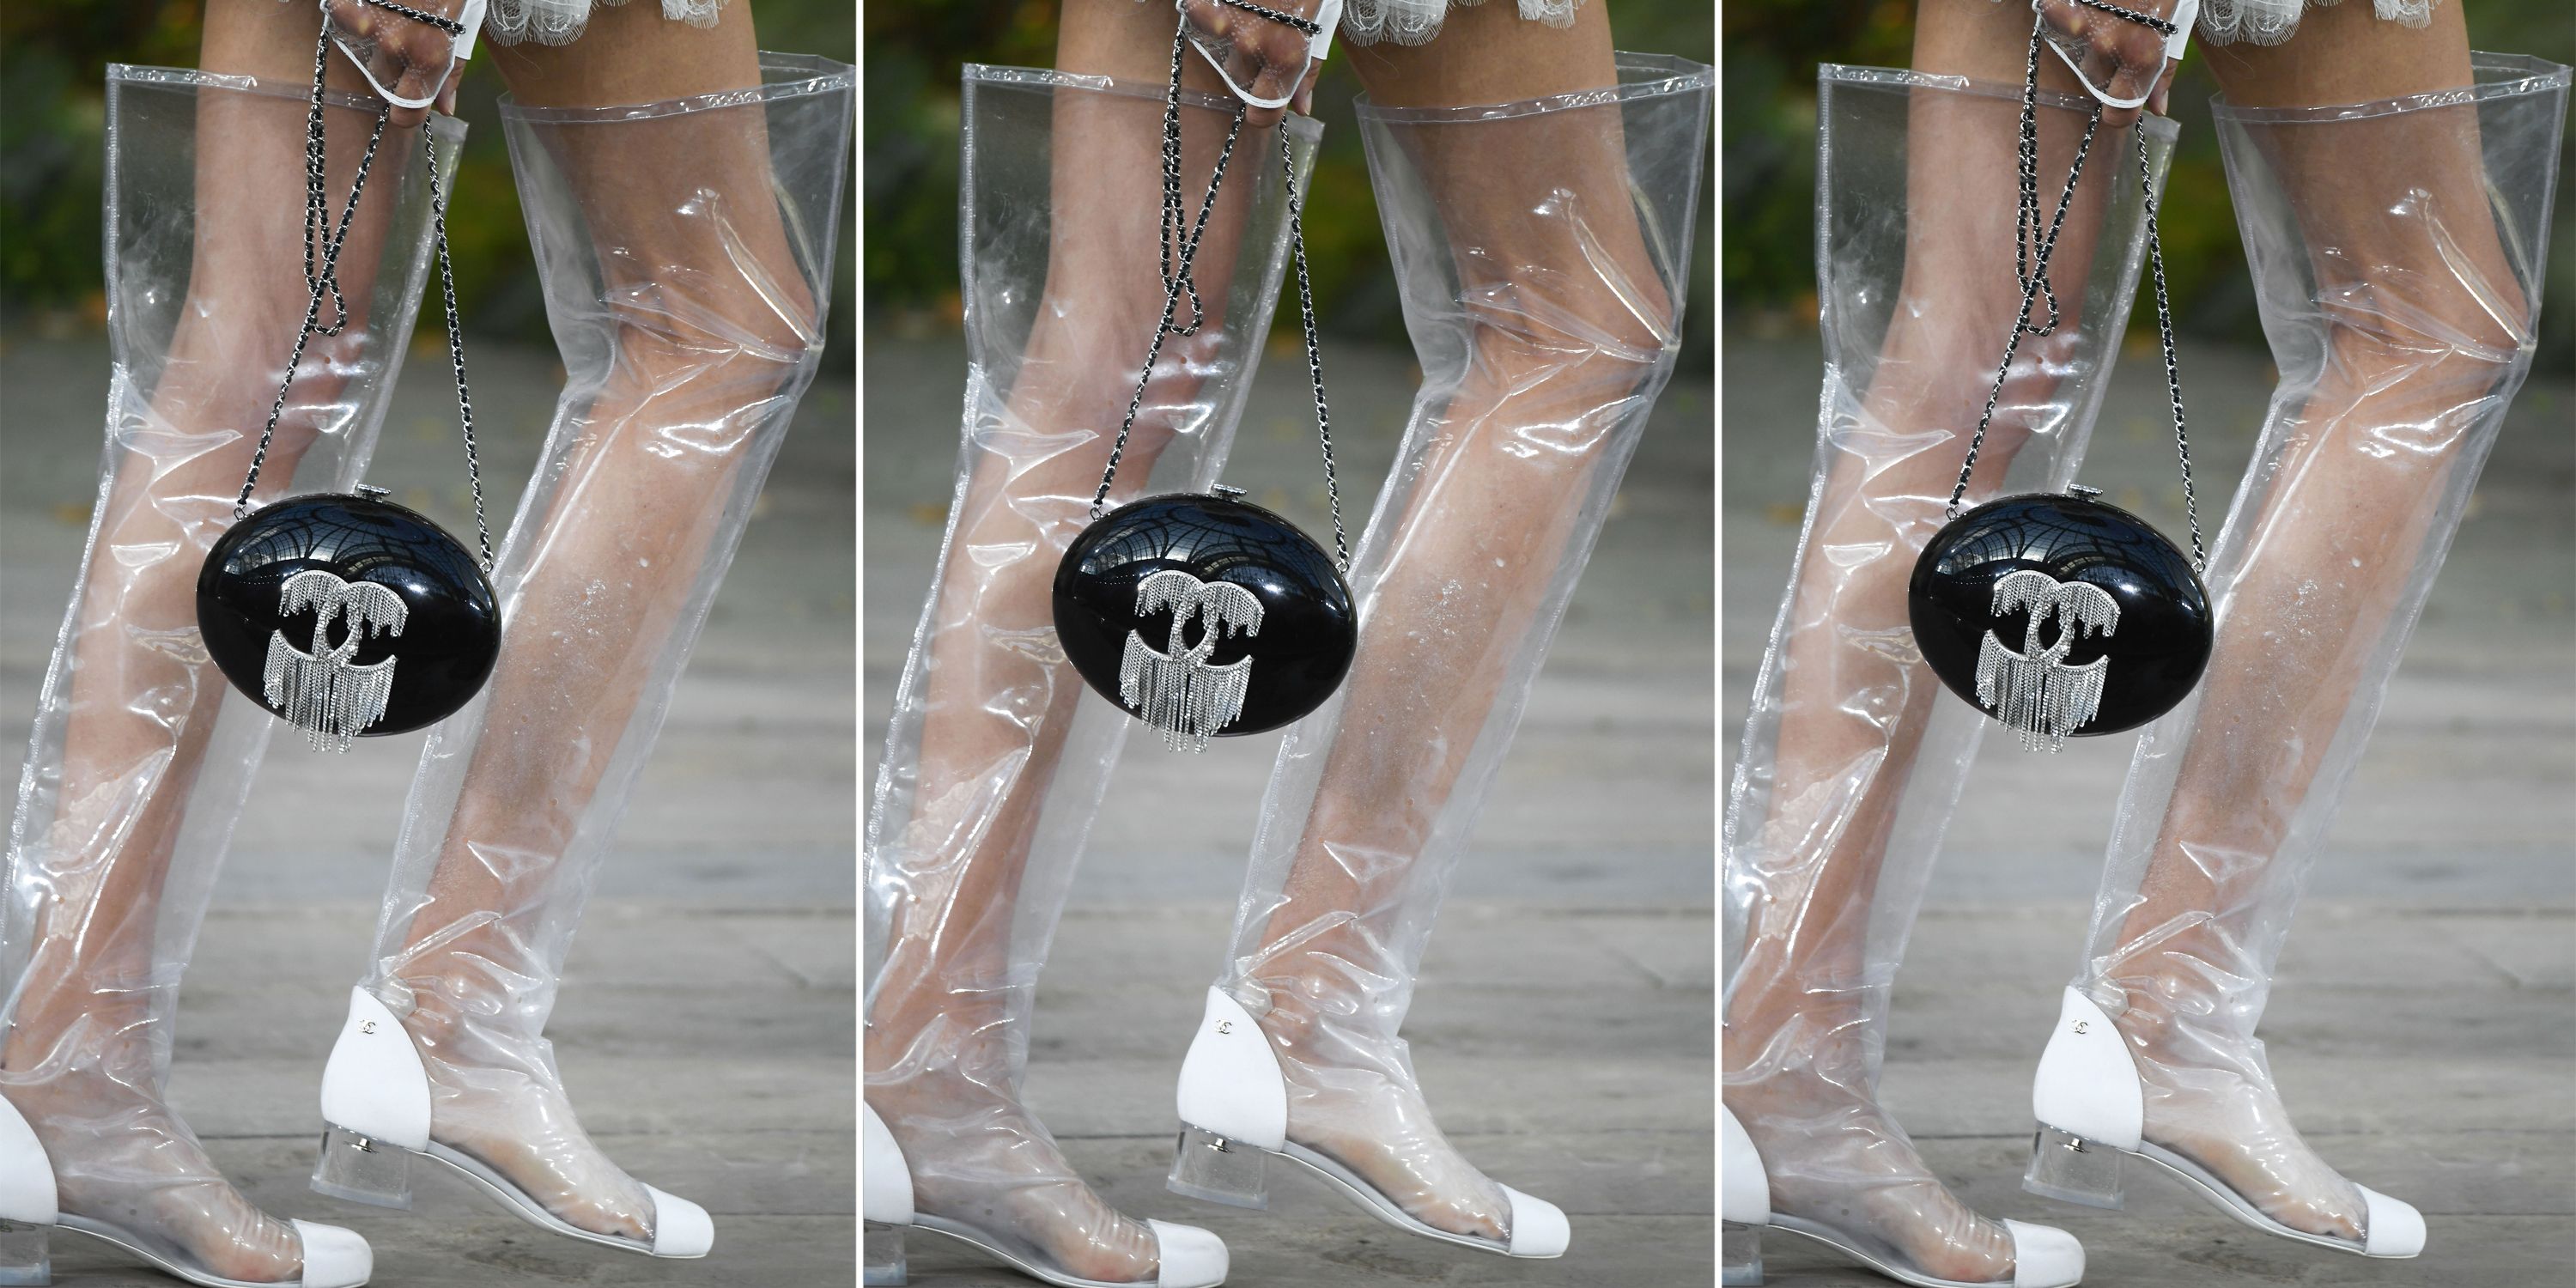 chanel rain boots outfit